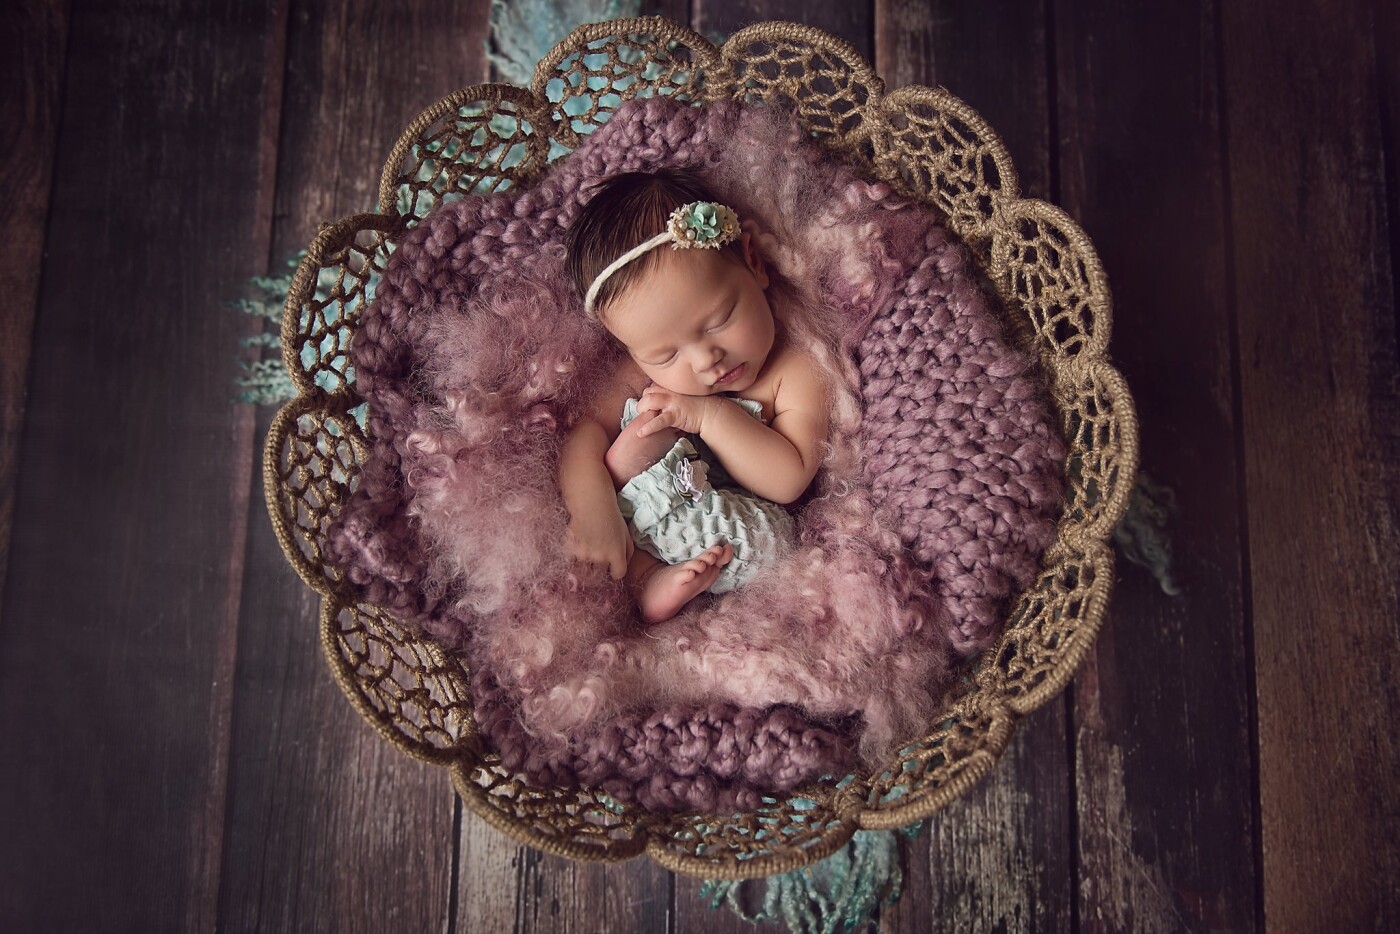 As a newborn photographer people trust you with their precious babies and everlasting memories, this parent had total belief in me and my visions.When I told mum I'm going to be combing blues & purples she couldn’t ‘see it’ but said go for it.<br />
I love this photo, I love this precious baby, I love combing colour.